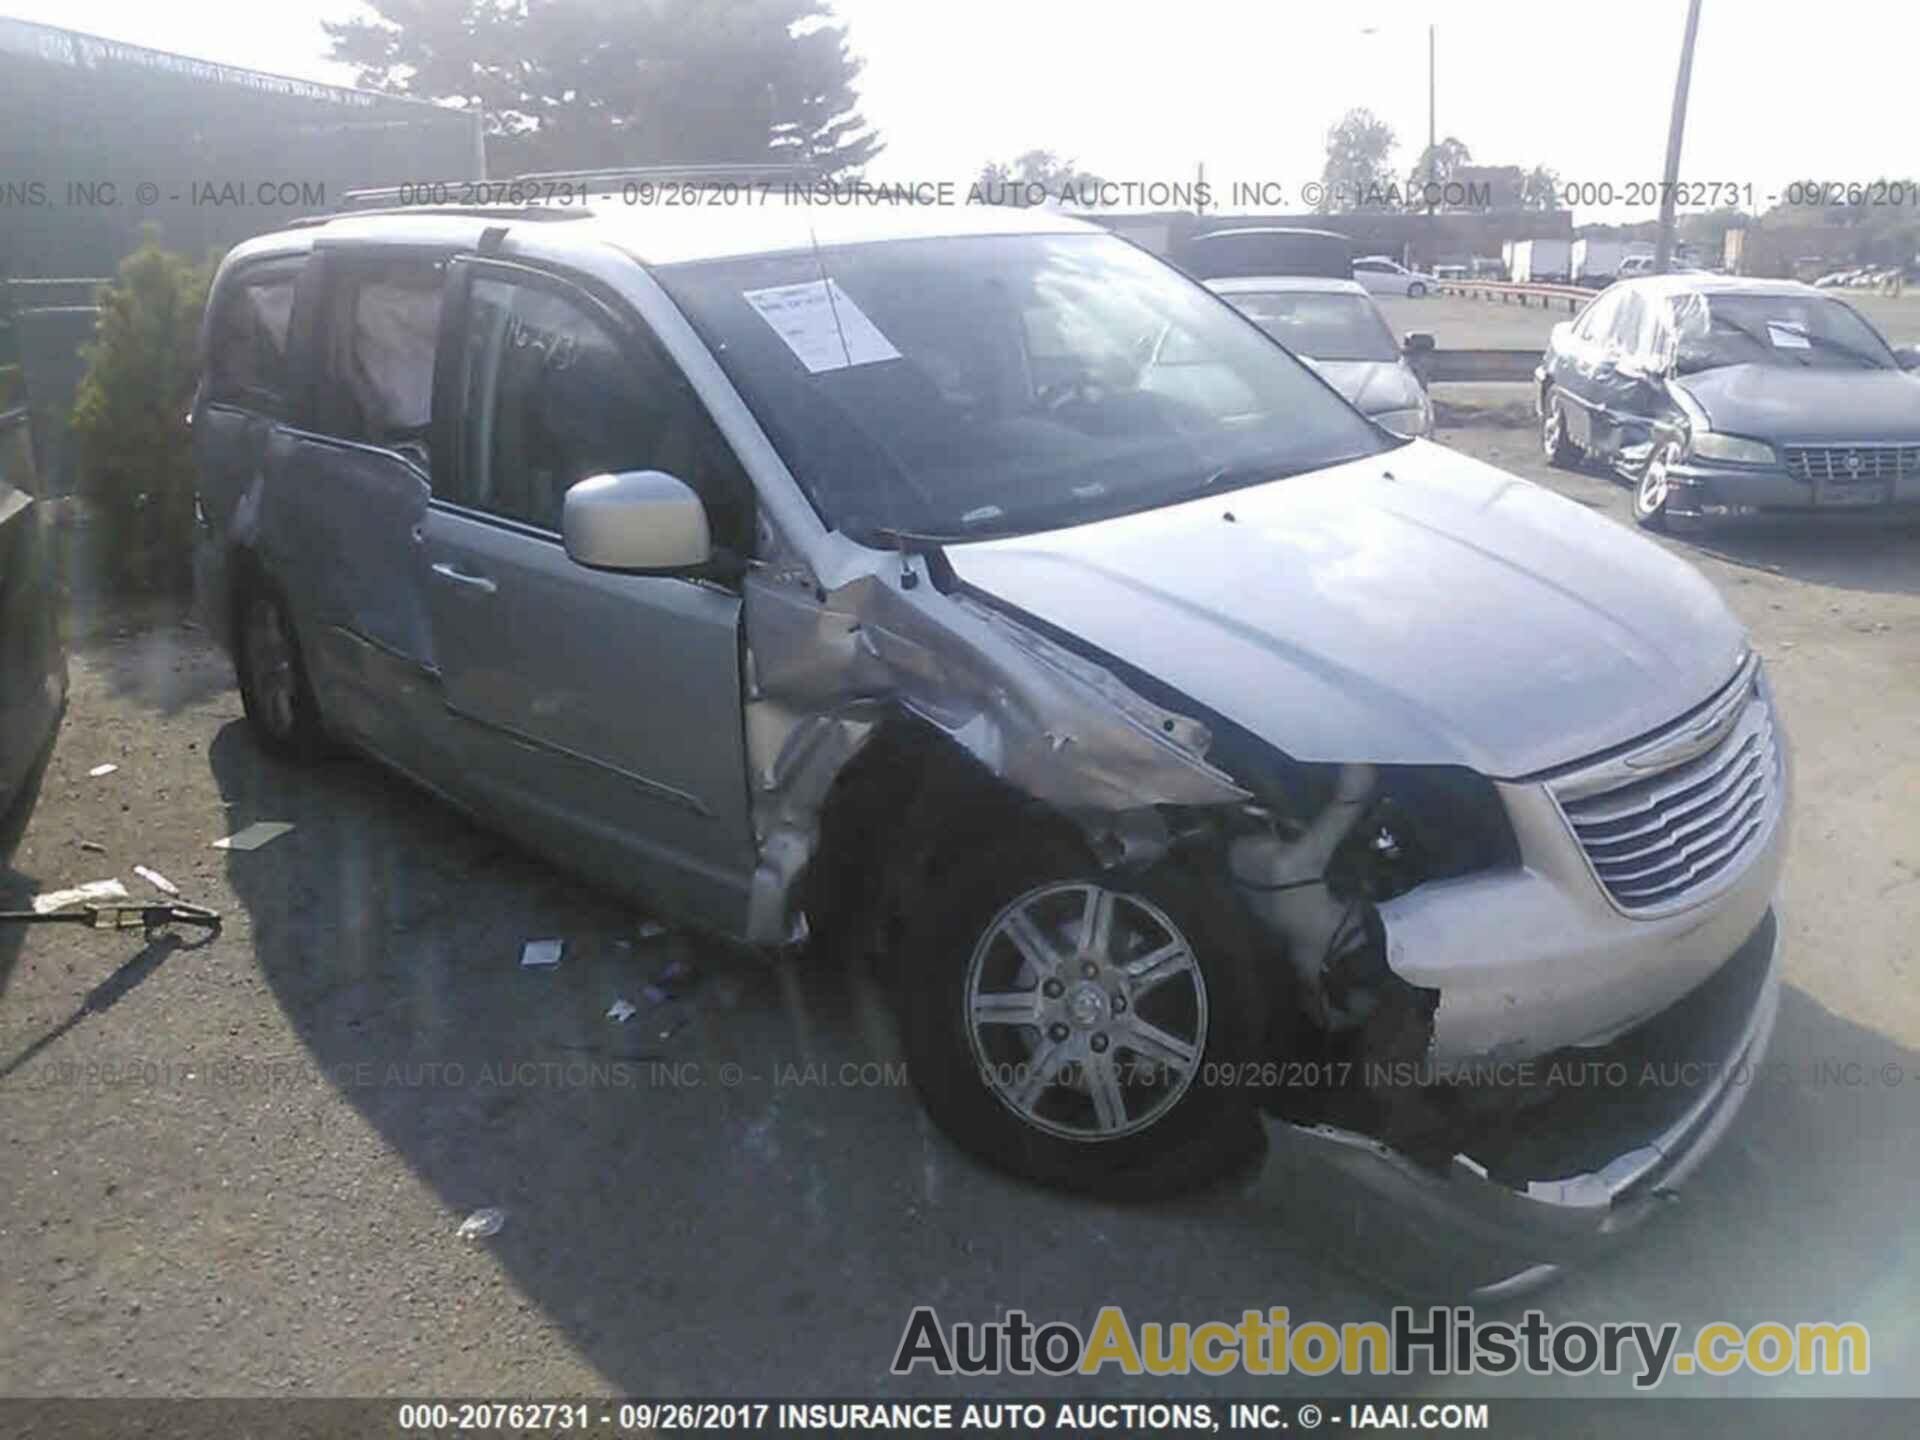 Chrysler Town and country, 2A4RR5DG1BR683640